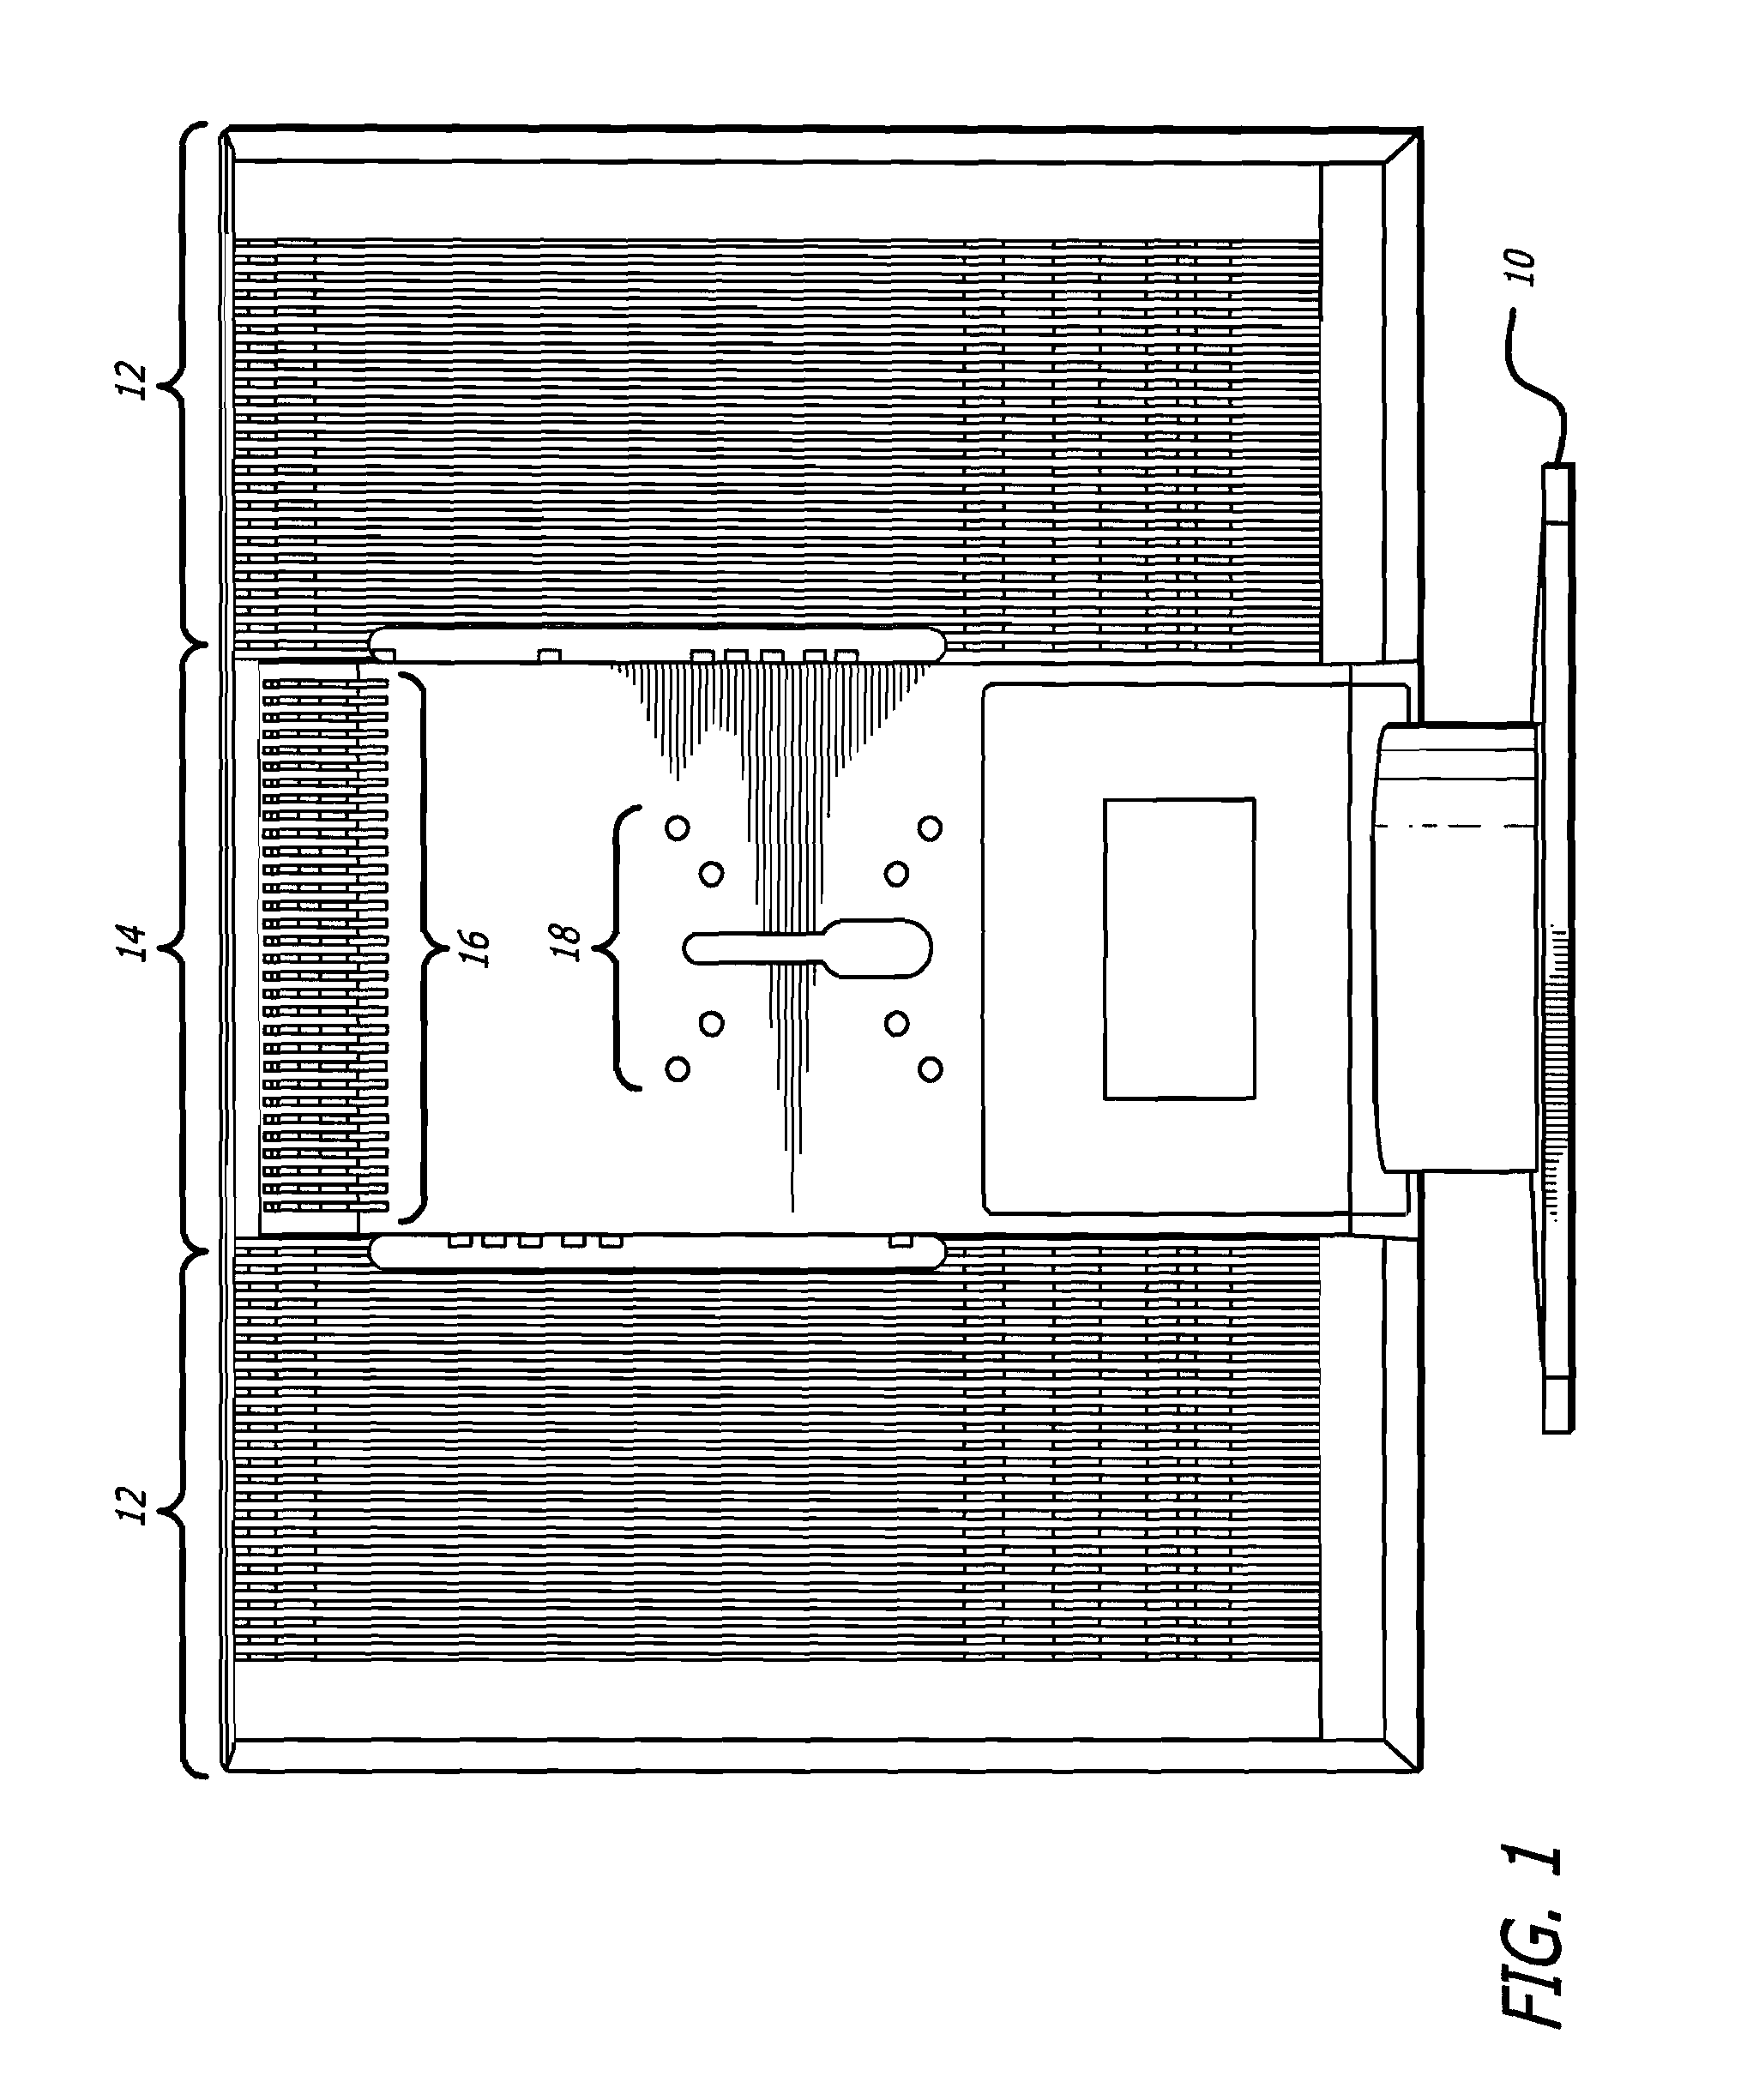 Back panel for video display device